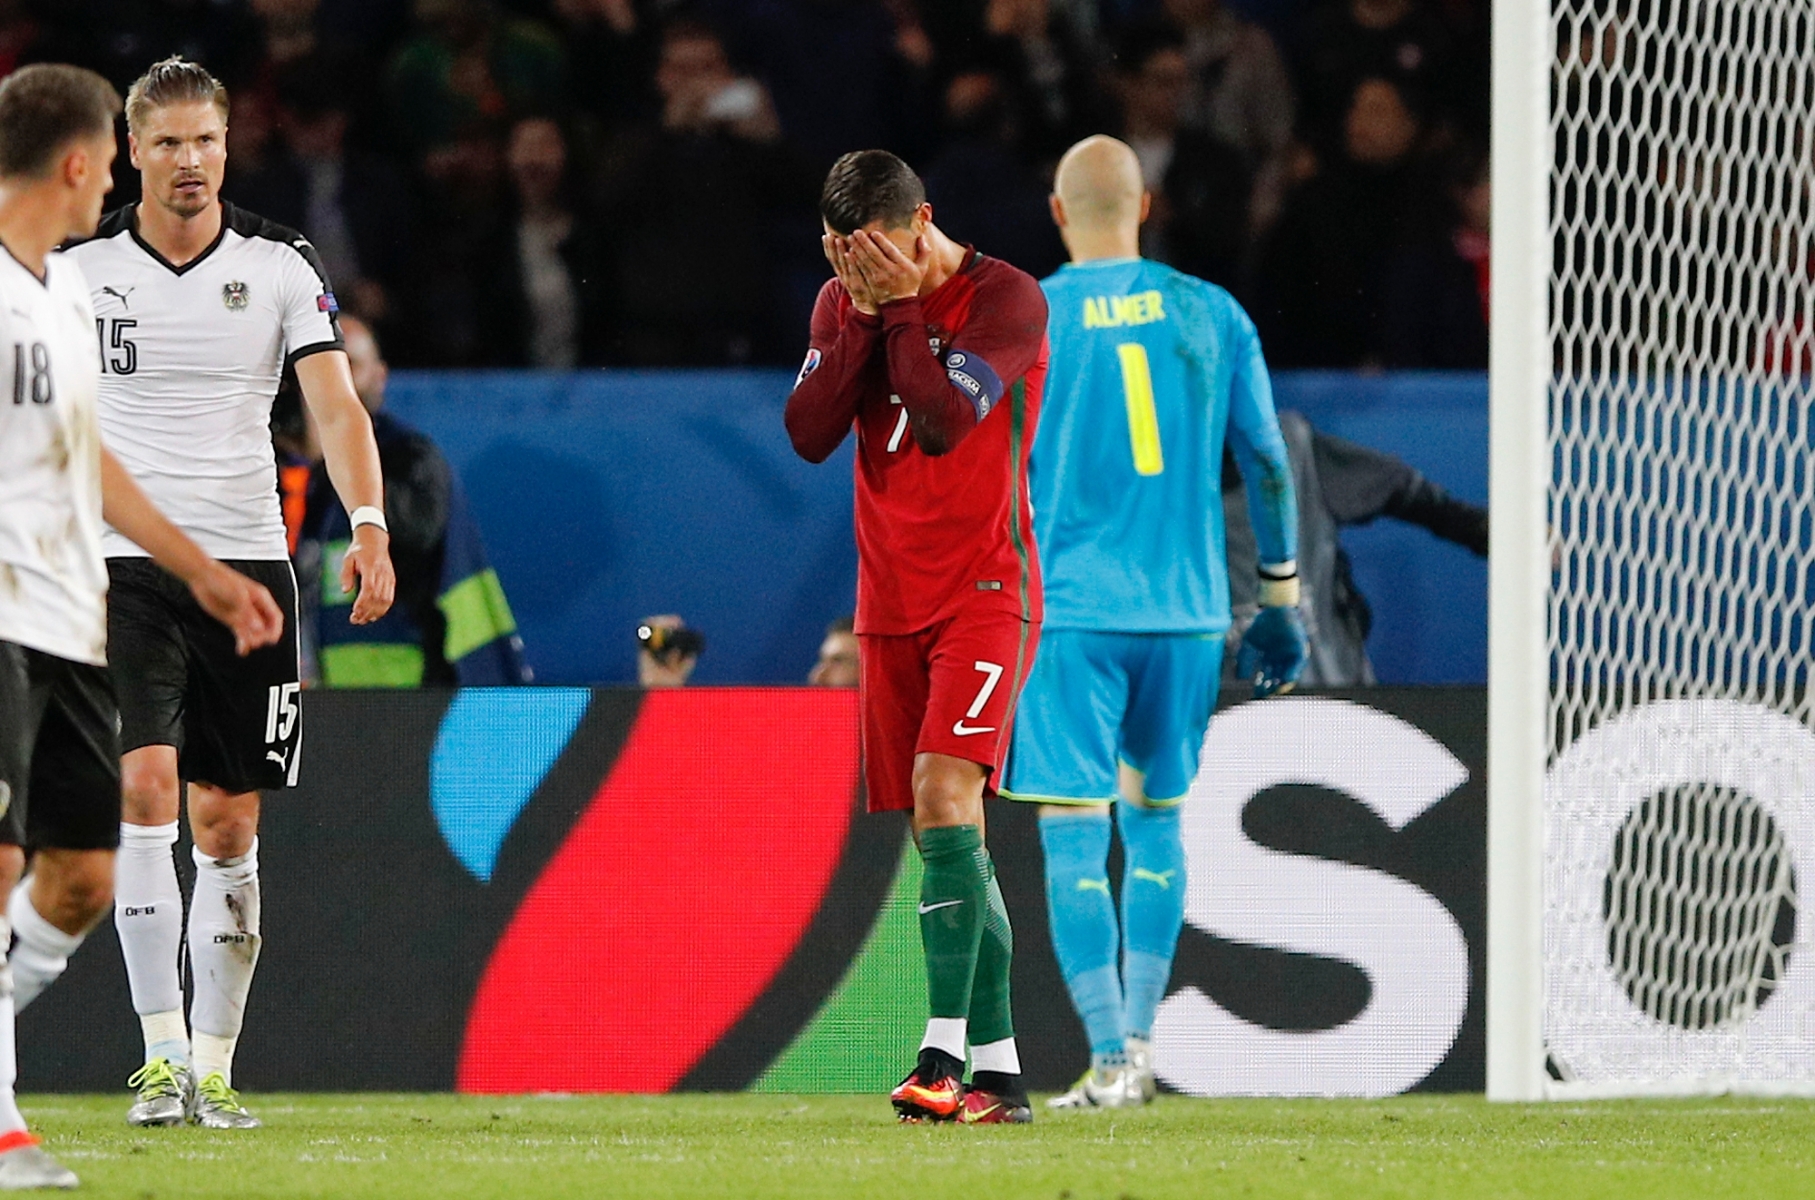 Portugal's Cristiano Ronaldo, center, holds his face after missing a penalty kick, during the Euro 2016 Group F soccer match between Portugal and Austria at the Parc des Princes stadium in Paris, France, Saturday, June 18, 2016. (AP Photo/Christophe Ena) APTOPIX Soccer Euro 2016 Portugal Austria